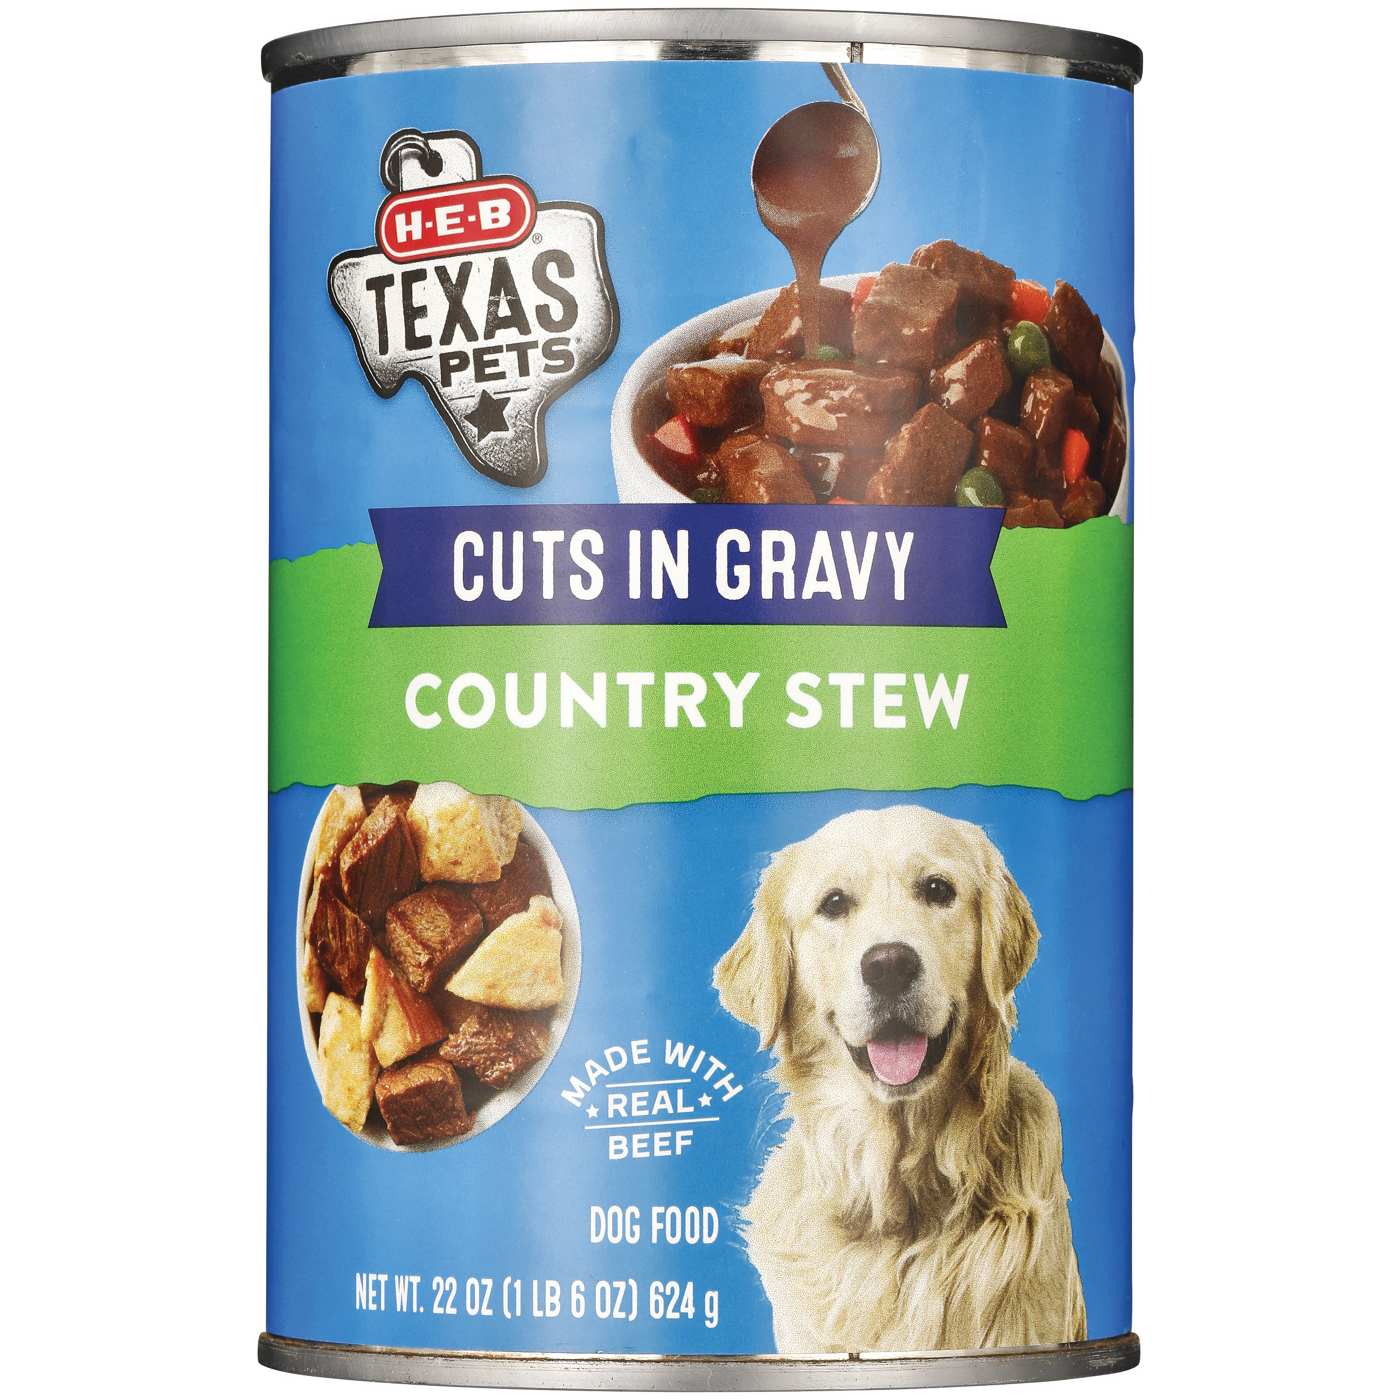 H-E-B Texas Pets Country Stew Cuts in Gravy Wet Dog Food; image 1 of 2